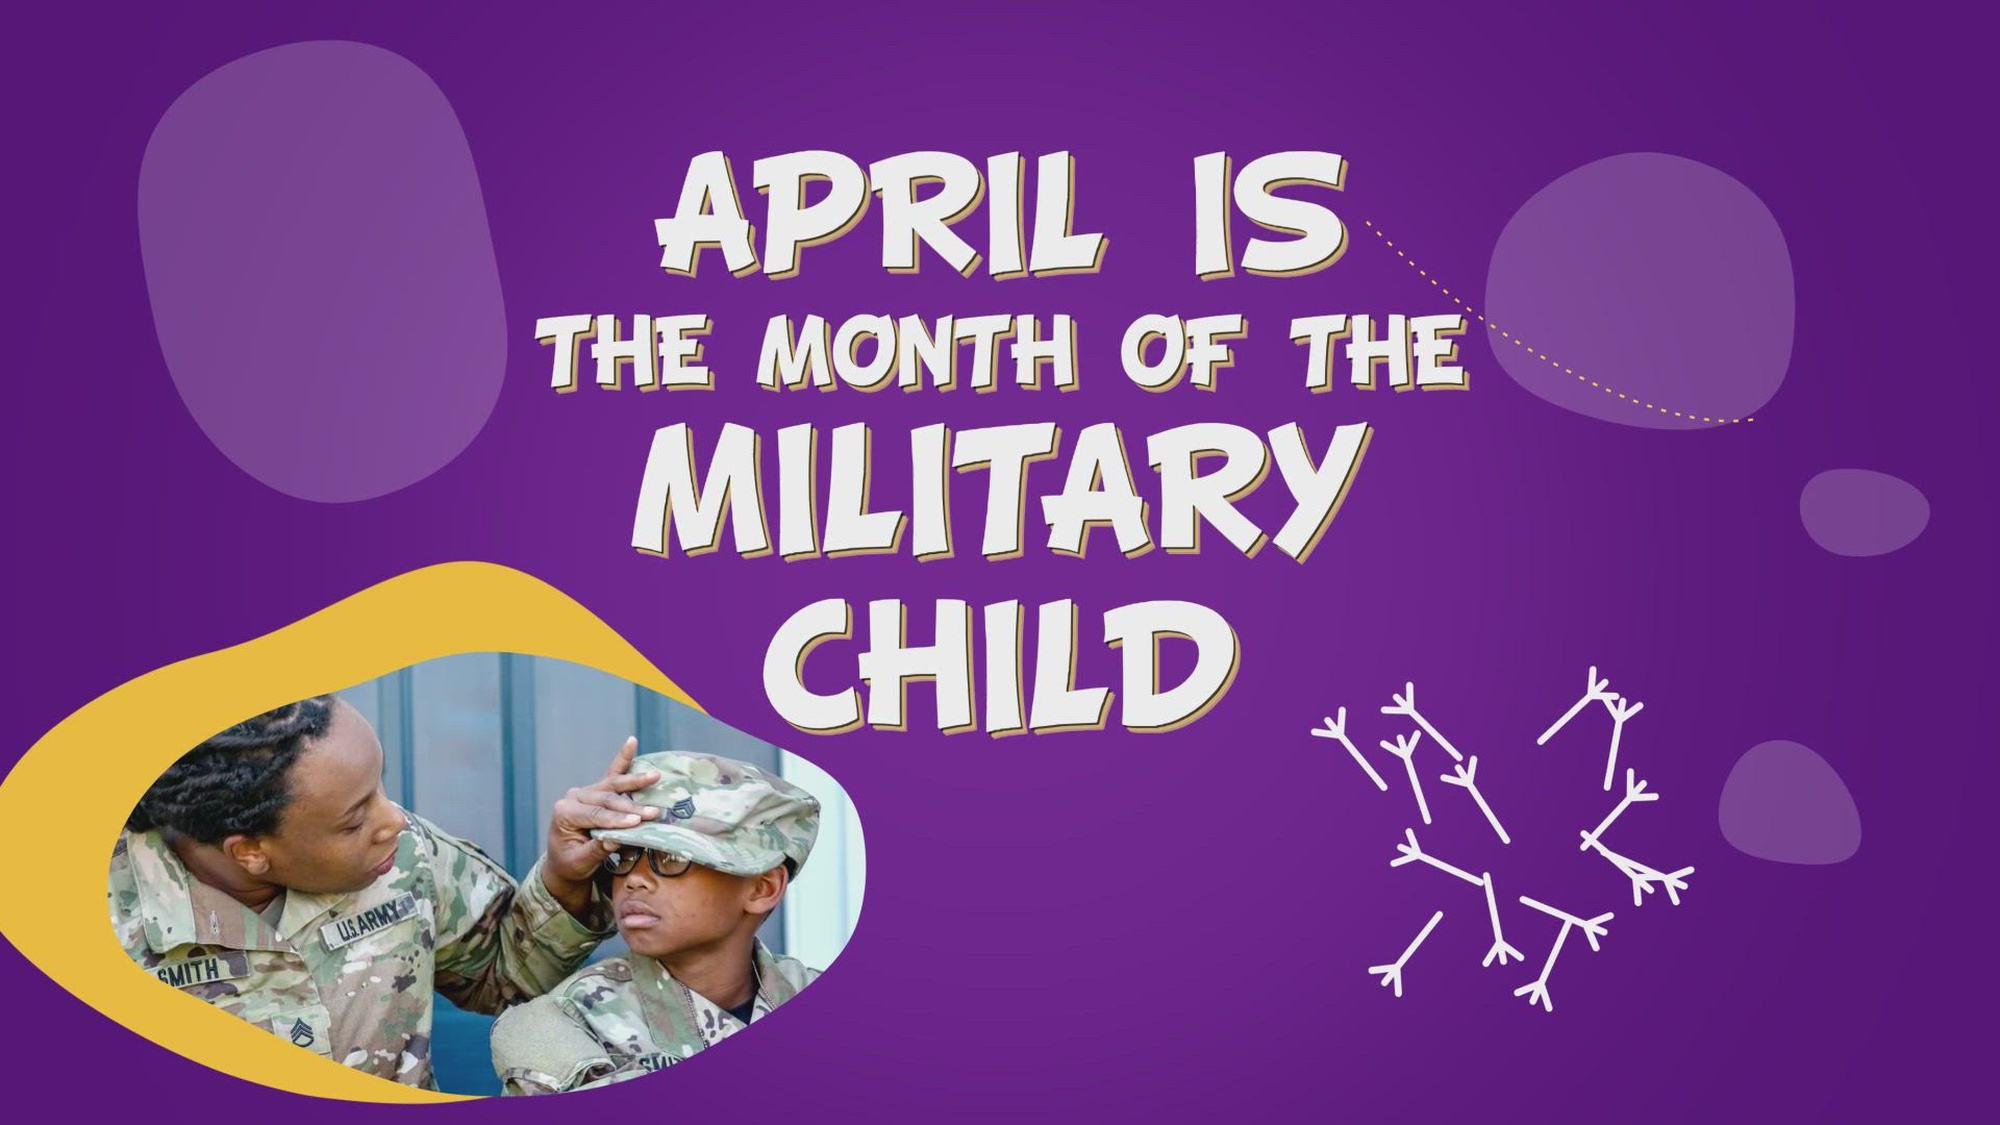 April is the Month of the Military Child. Join the Exchange as we recognize and celebrate our youngest heroes.